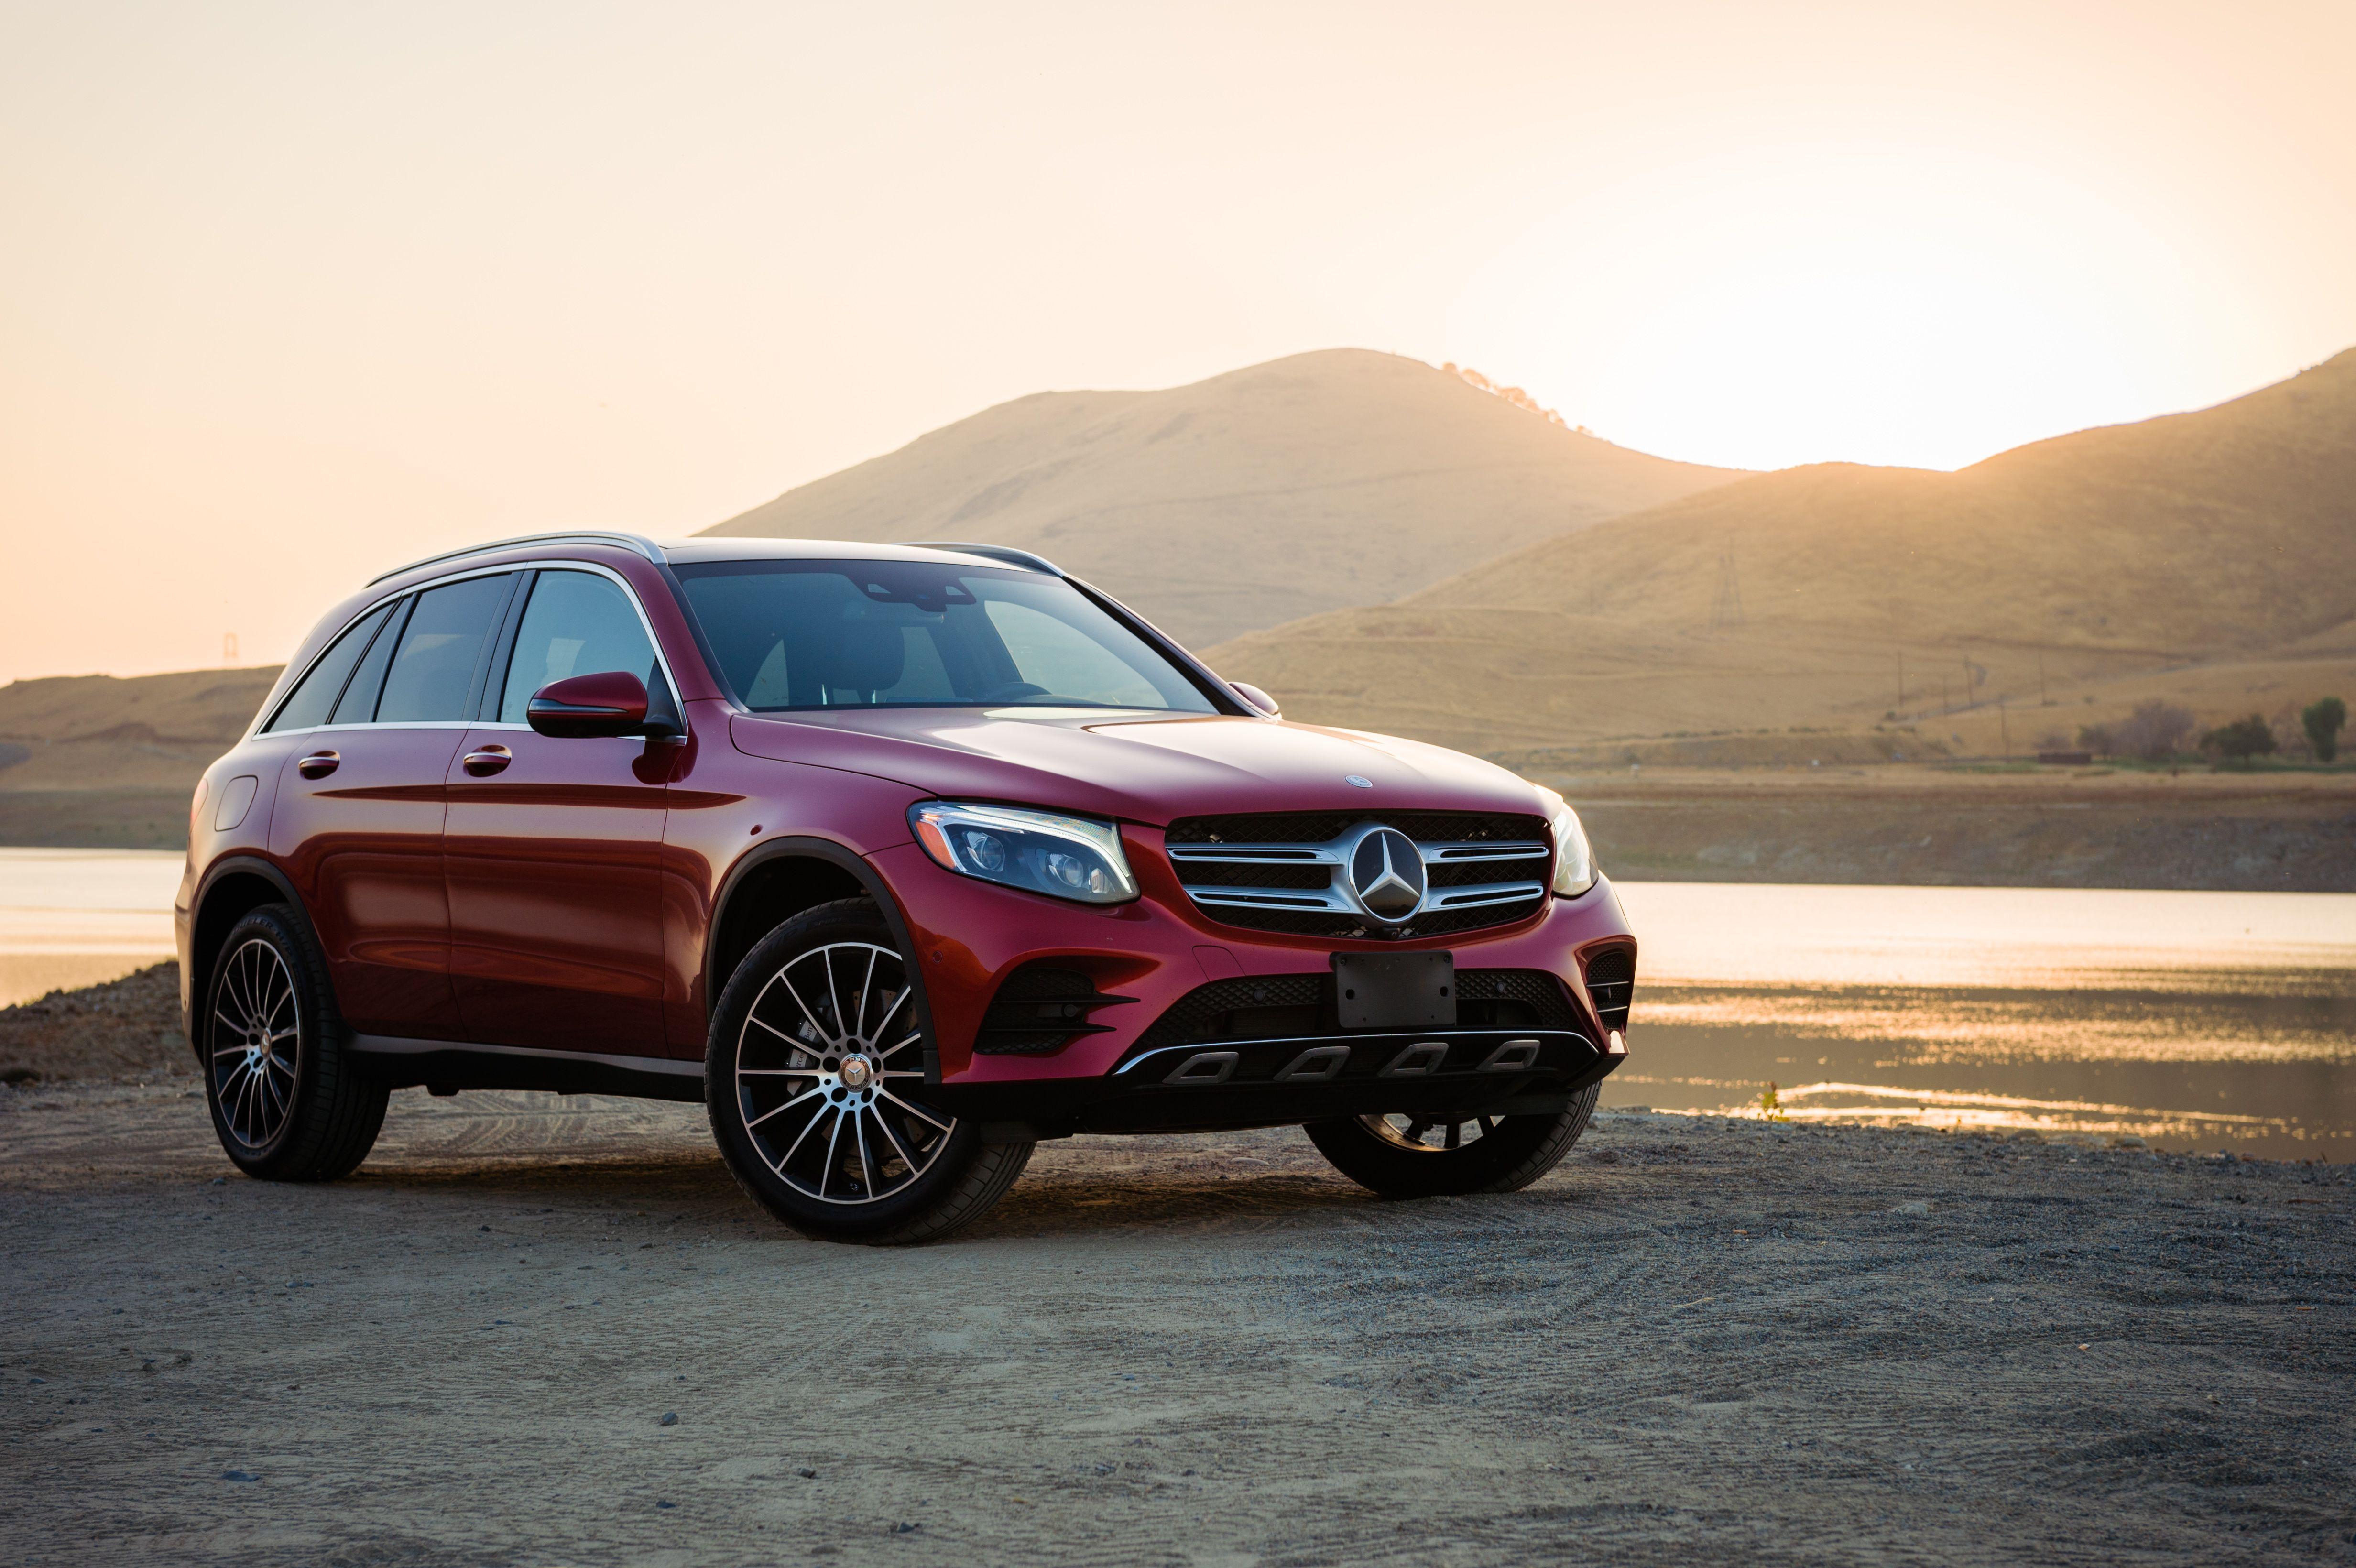 Mercedes Glc Wallpapers Top Free Mercedes Glc Backgrounds Wallpaperaccess